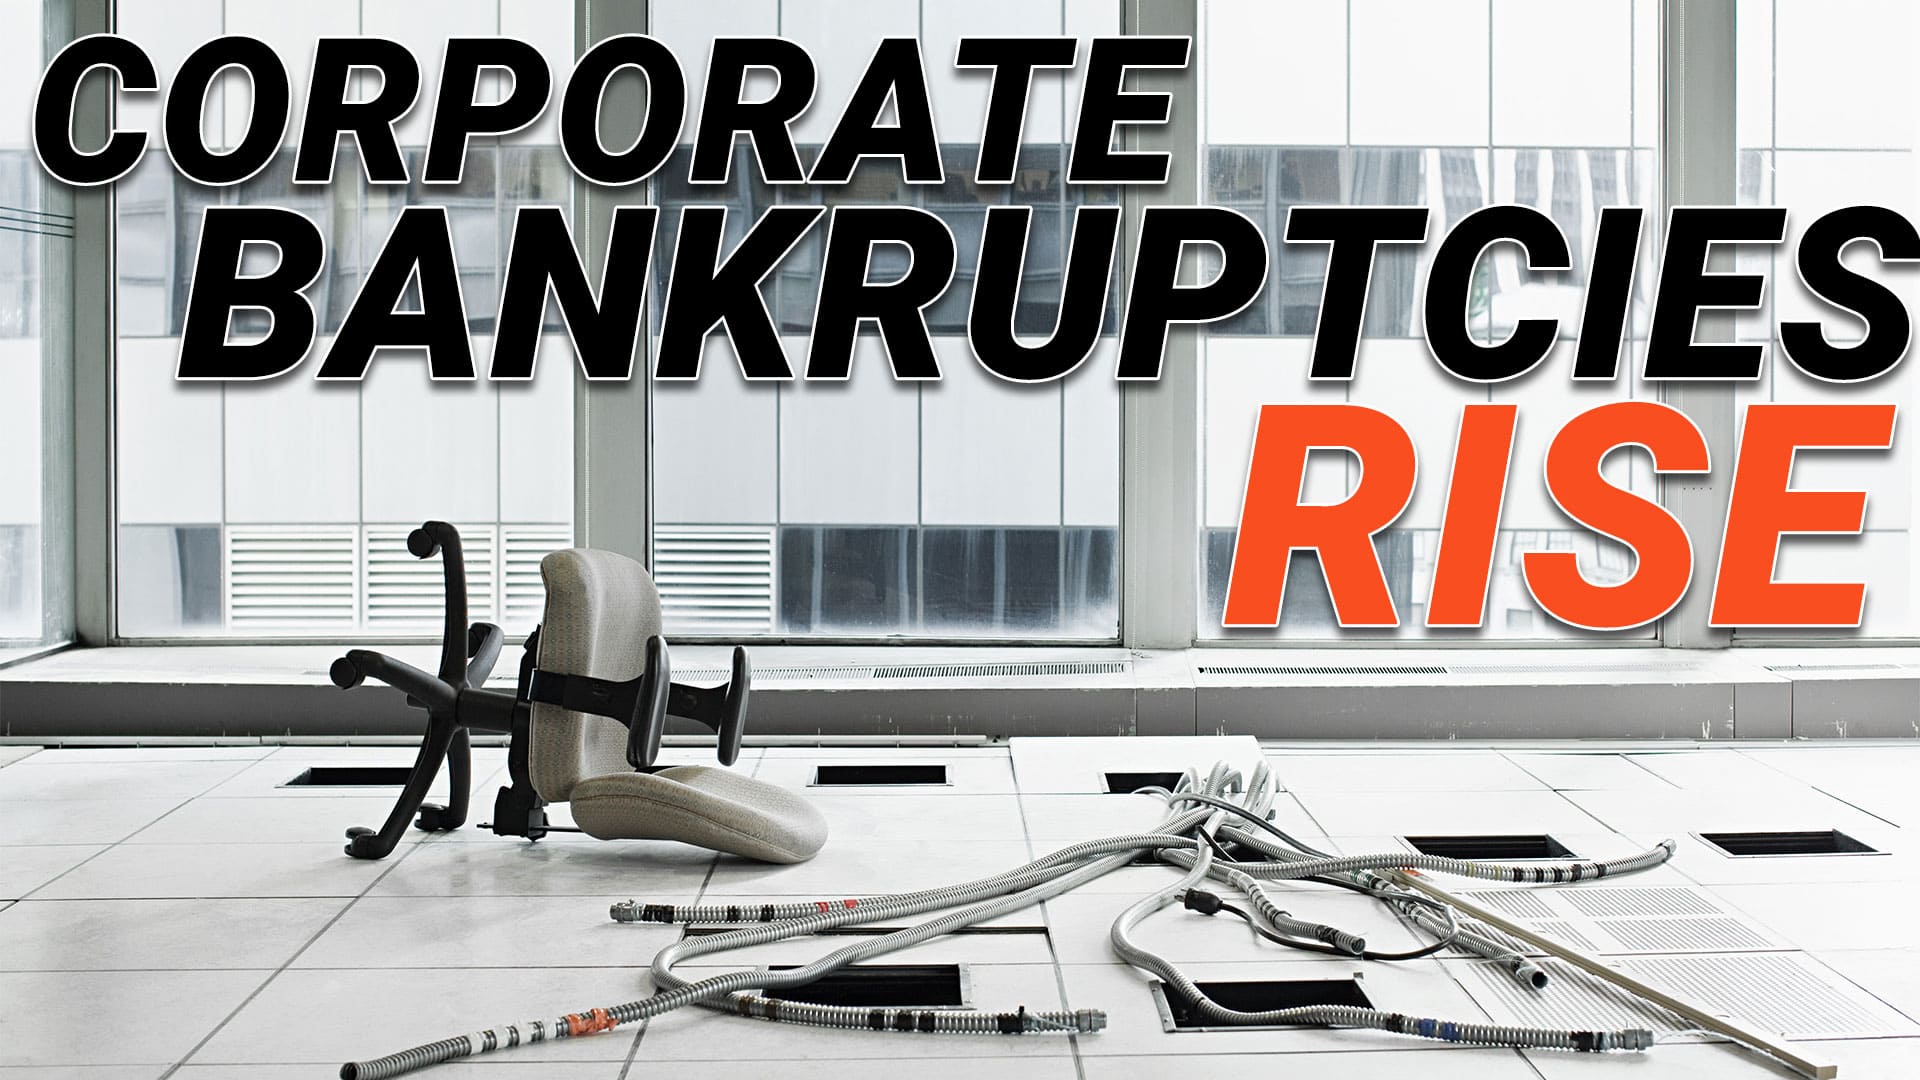 Why You Should Expect More Corporate Bankruptcies Ahead